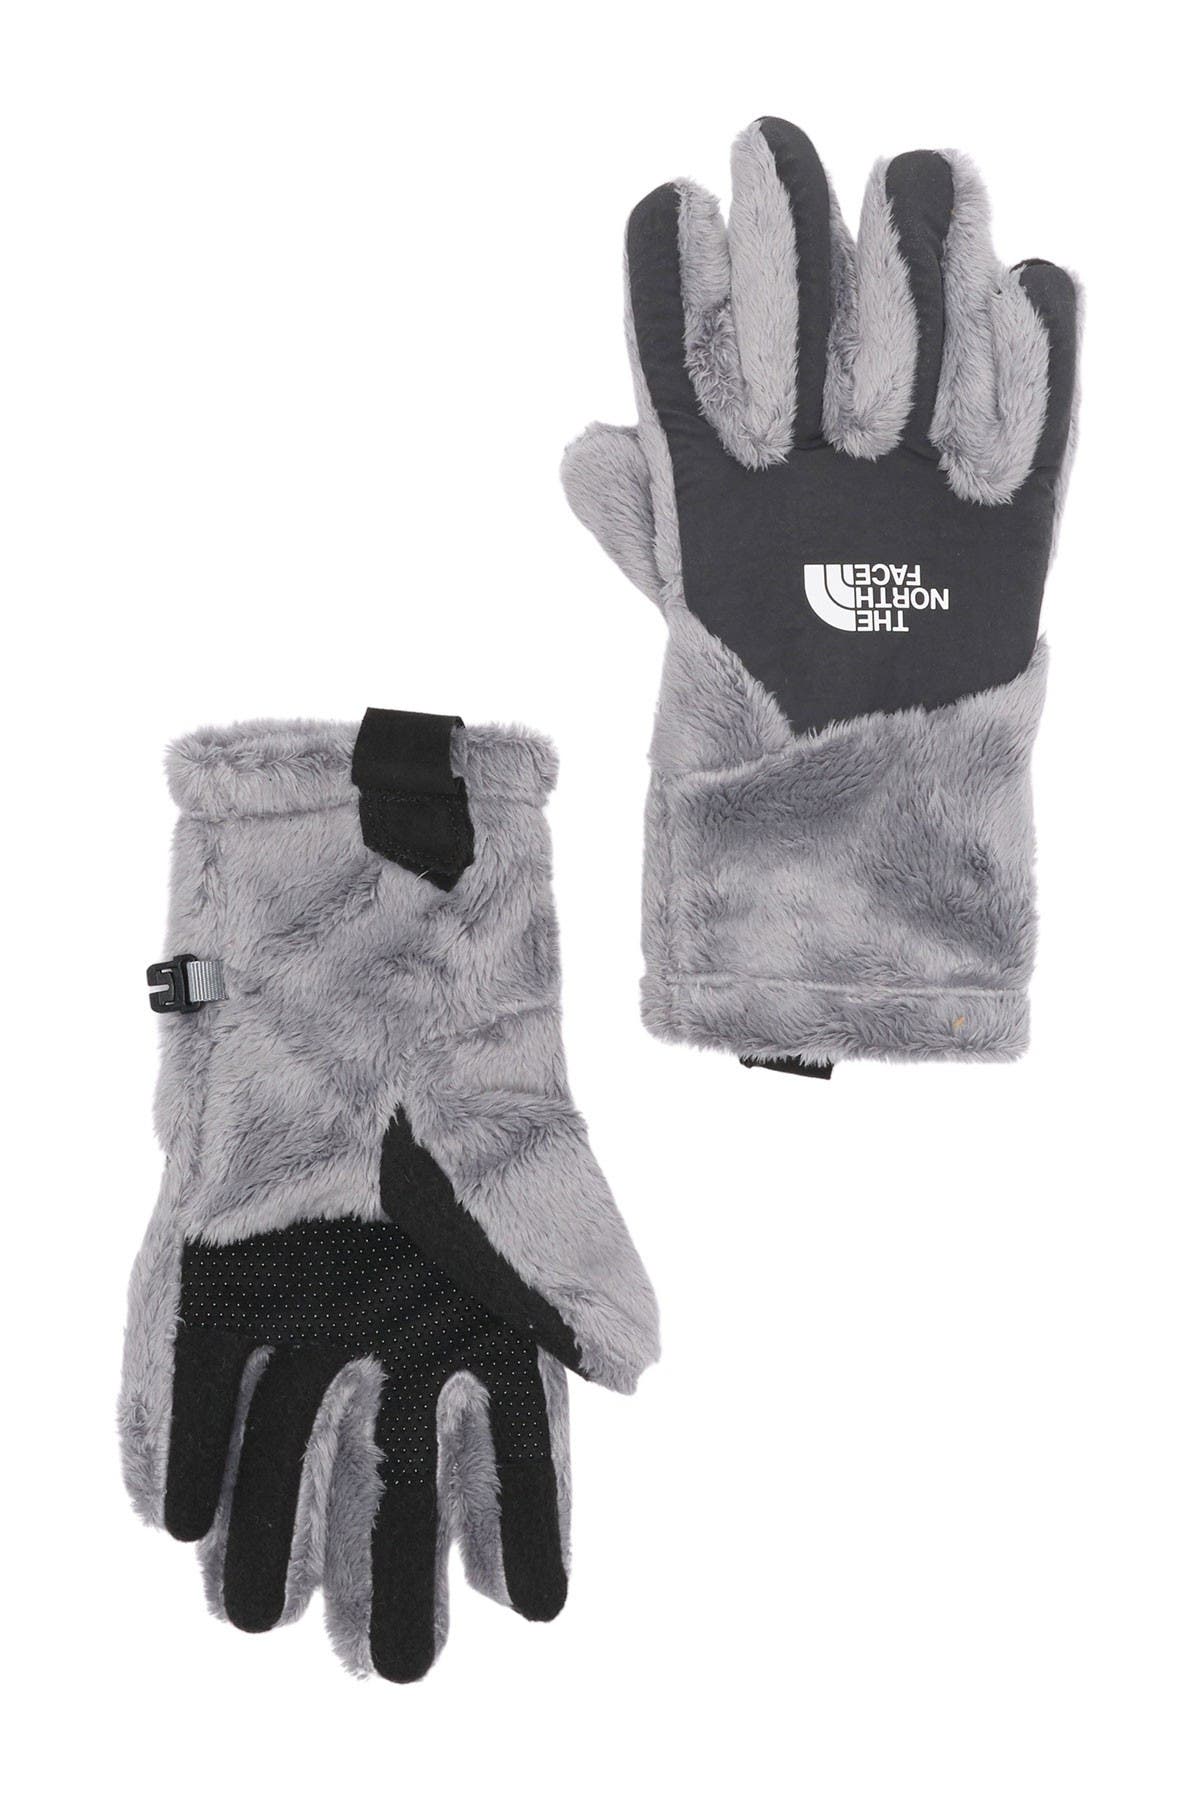 the north face osito gloves